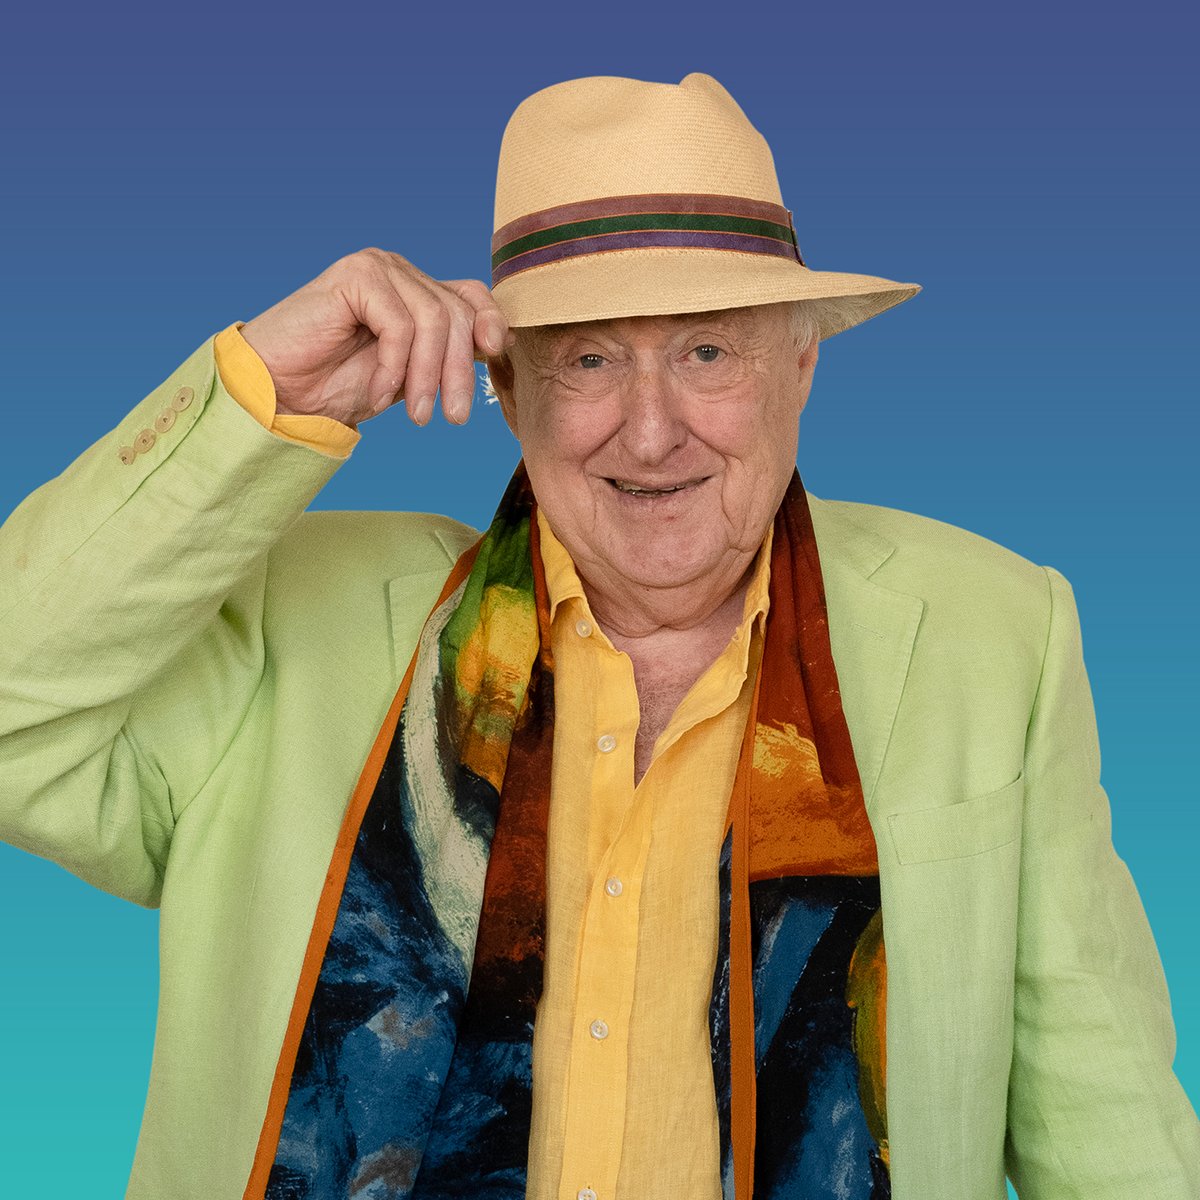 Book your tickets now for Henry @blowersh Blofeld
on Tuesday 28 March!

Hear the inside stories from The #RealMarigoldHotel and then all the fun of Test Match Special. A must for #Cricket fans! 
Book now: bit.ly/3Wt1ByR